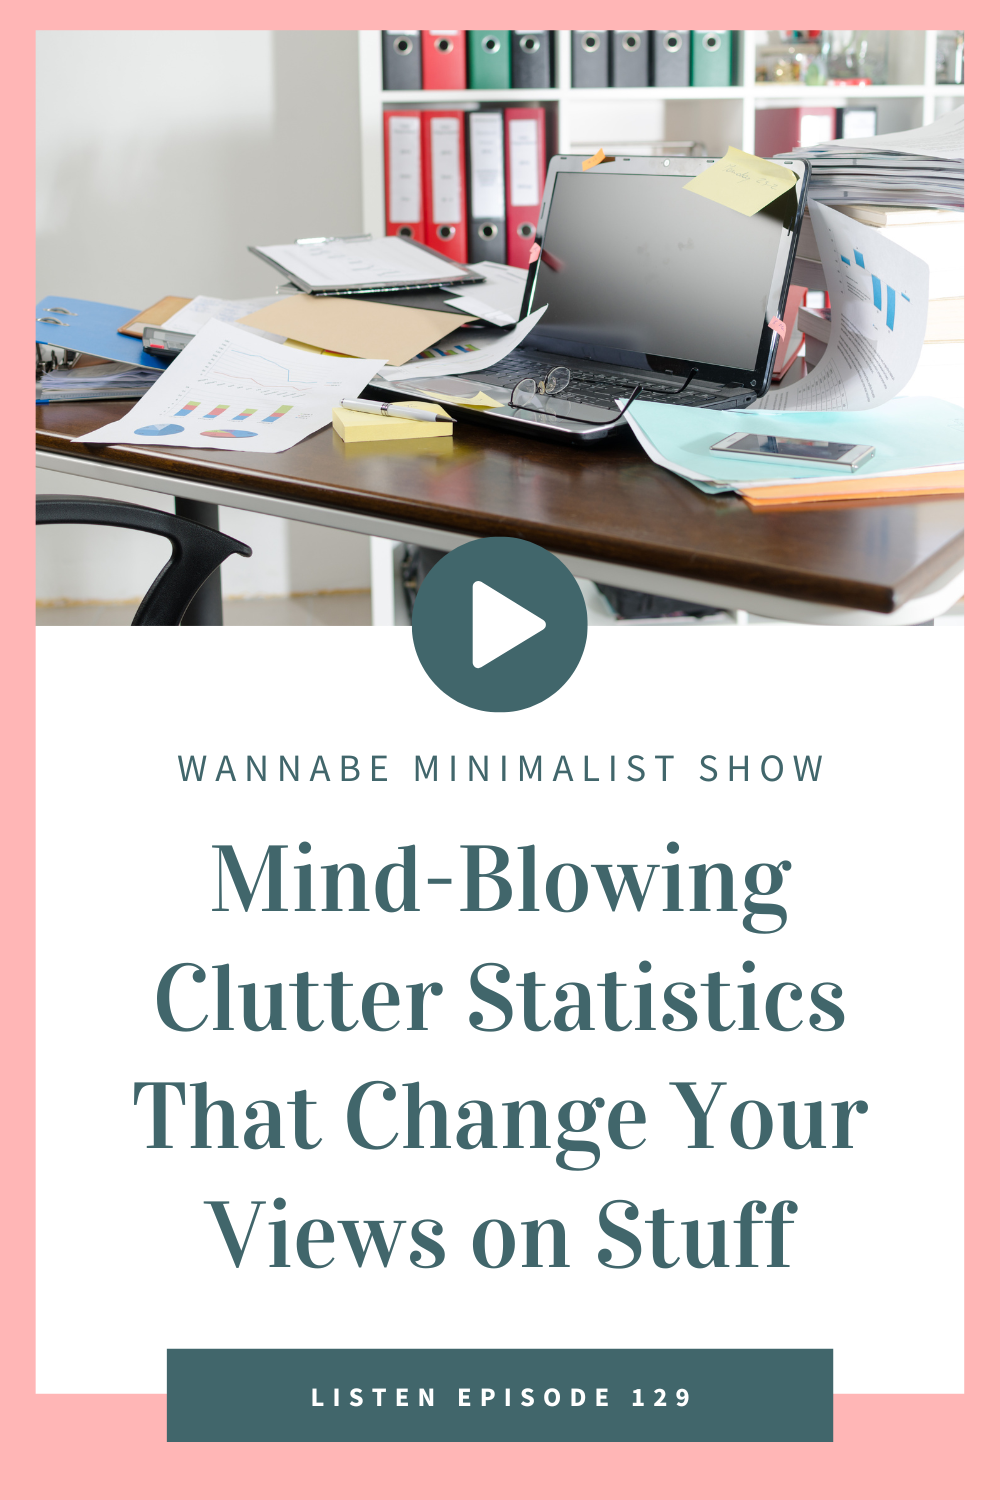 Mind-Blowing Clutter Statistics That Change Your Views on Stuff